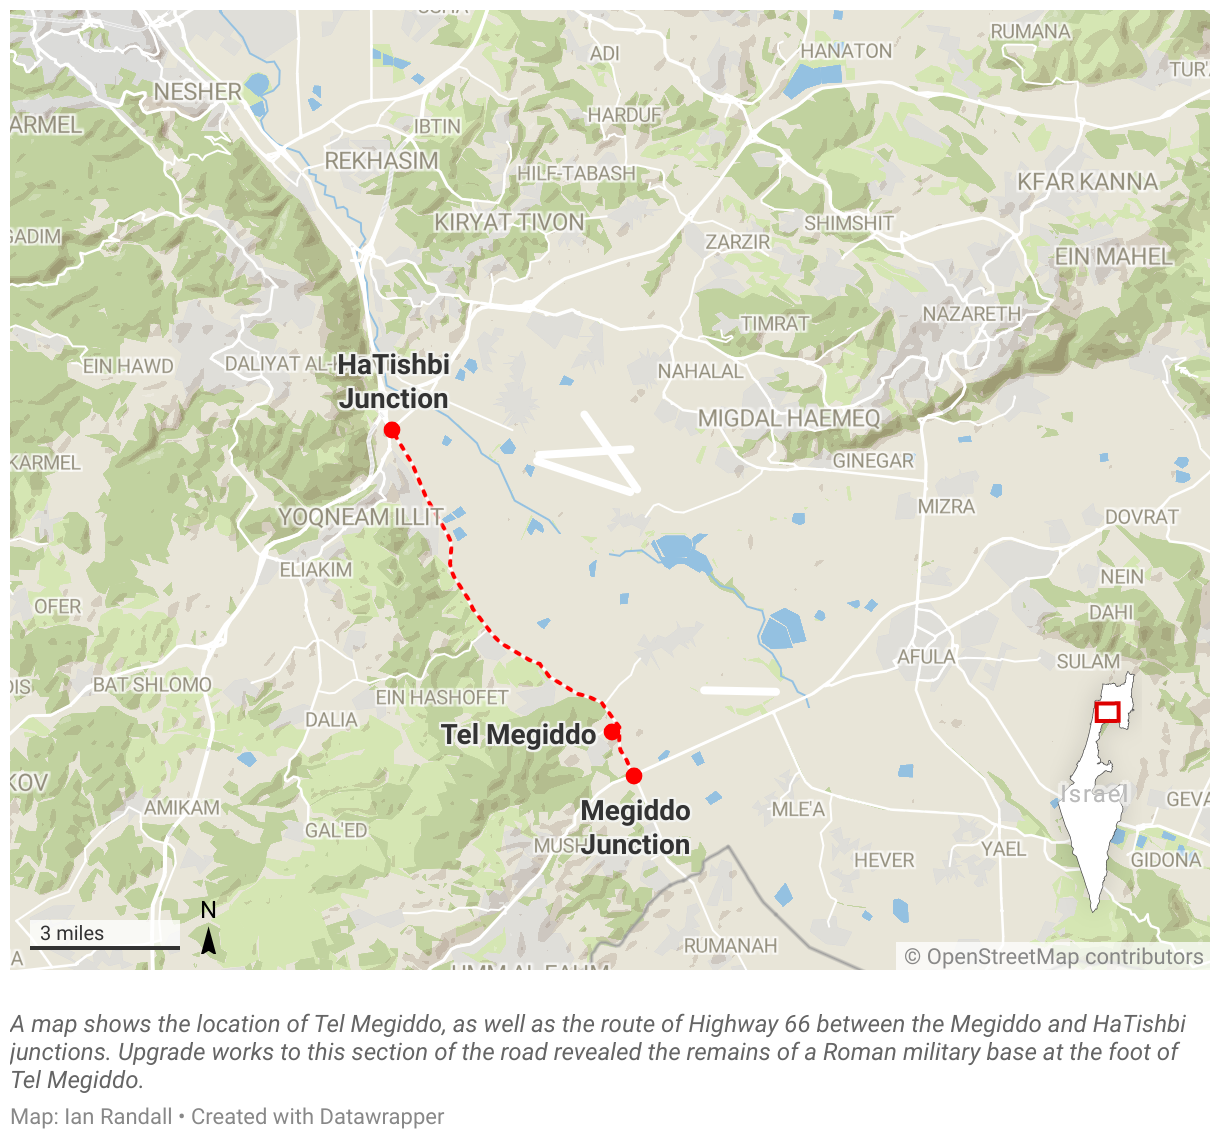 A map shows the location of Tel Megiddo, as well as the route of Highway 66 between the Megiddo and HaTishbi junctions.